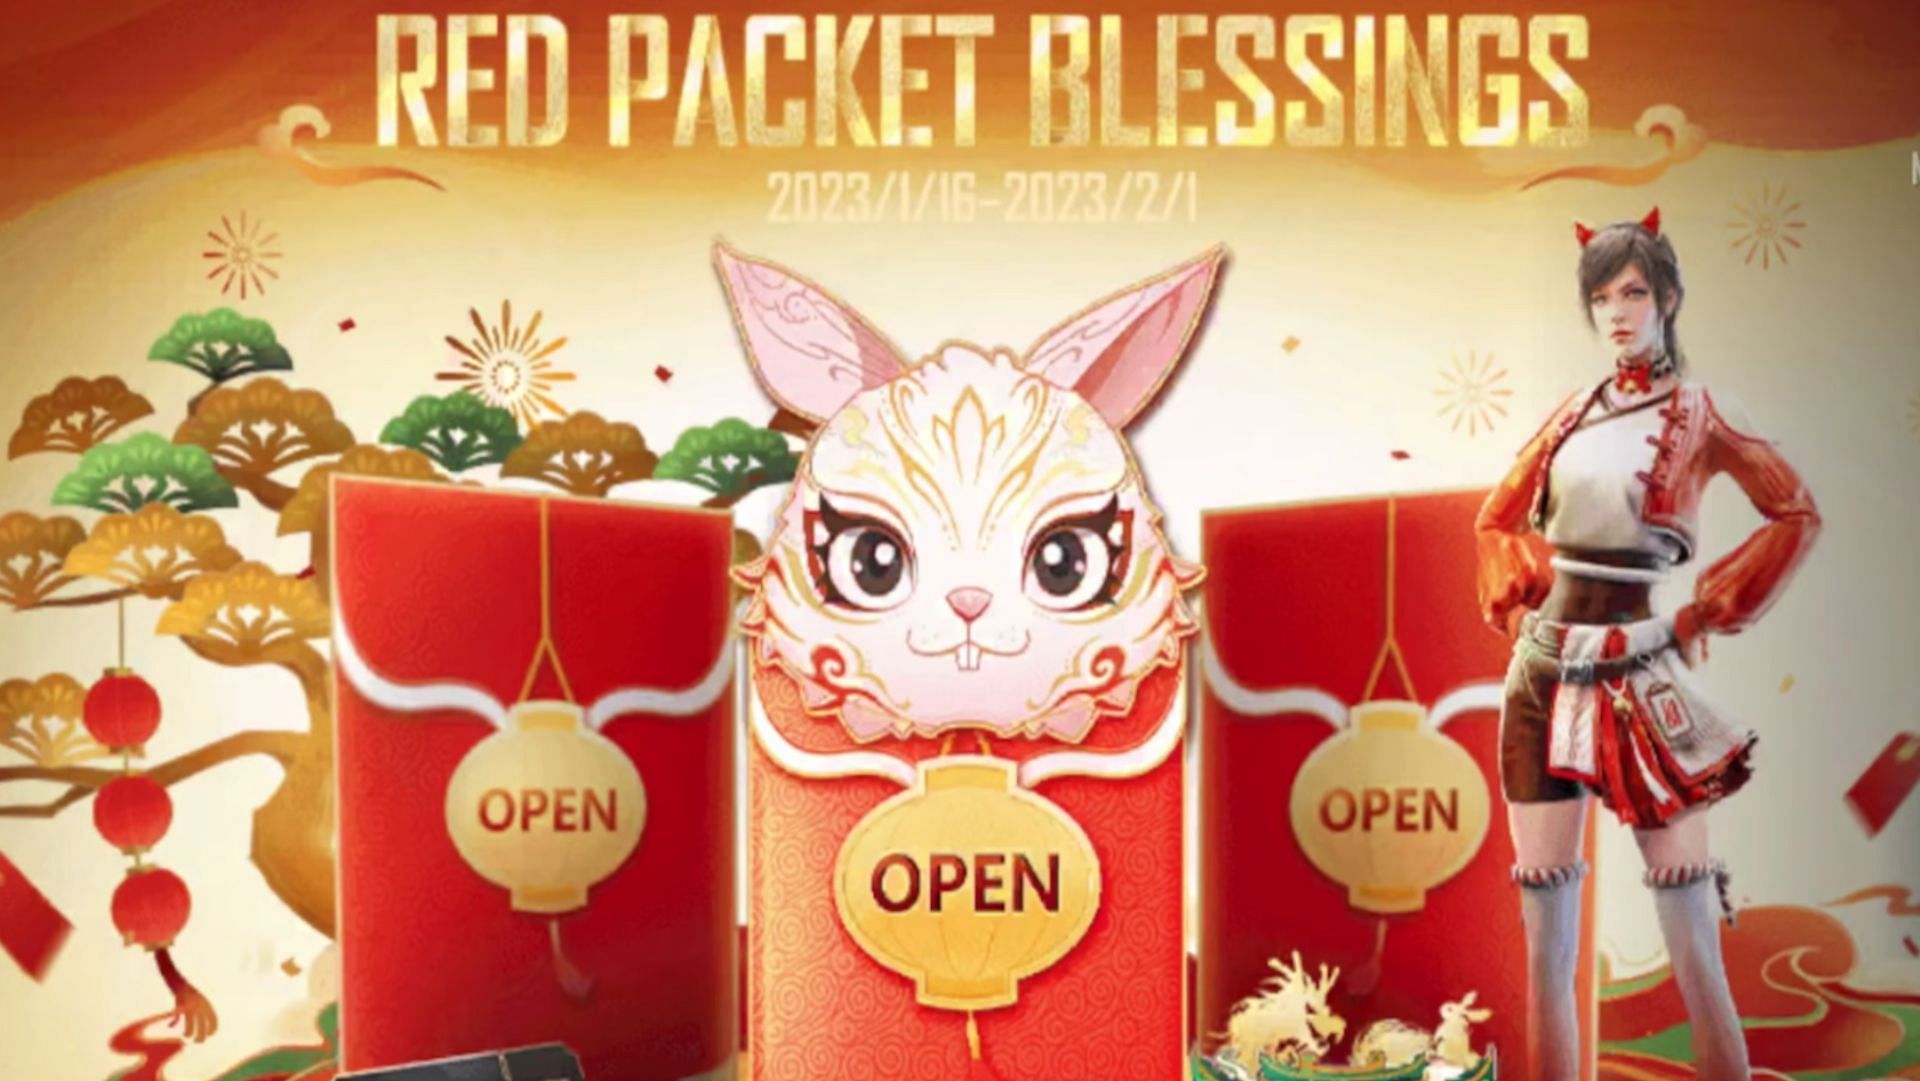 PUBG Mobile guide: How to get UC in new Red Packet Blessings event